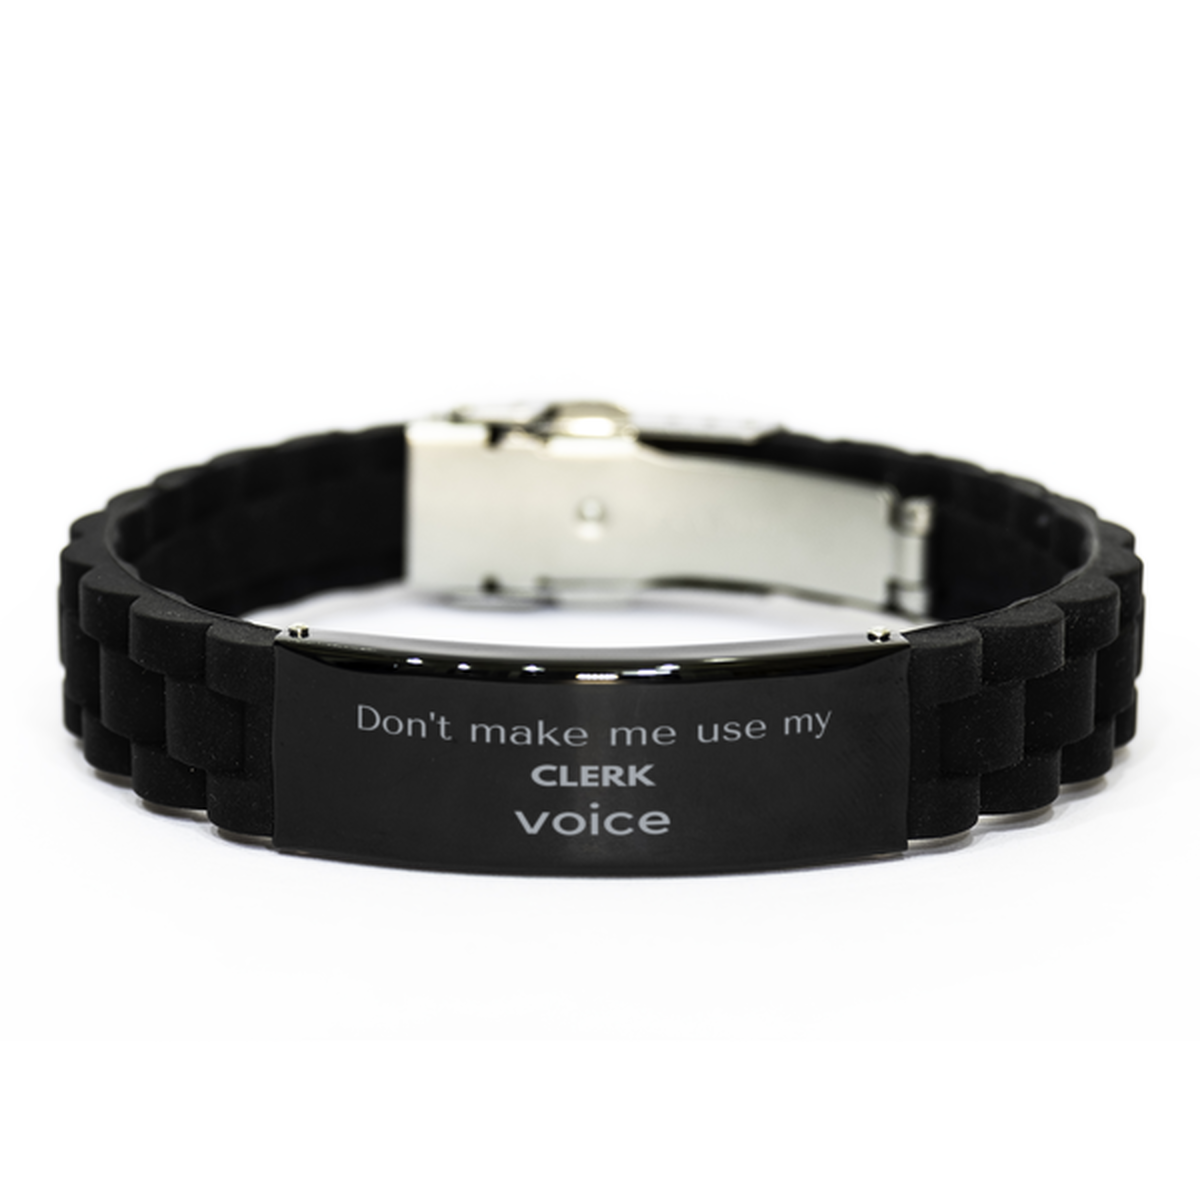 Don't make me use my Clerk voice, Sarcasm Clerk Gifts, Christmas Clerk Black Glidelock Clasp Bracelet Birthday Unique Gifts For Clerk Coworkers, Men, Women, Colleague, Friends